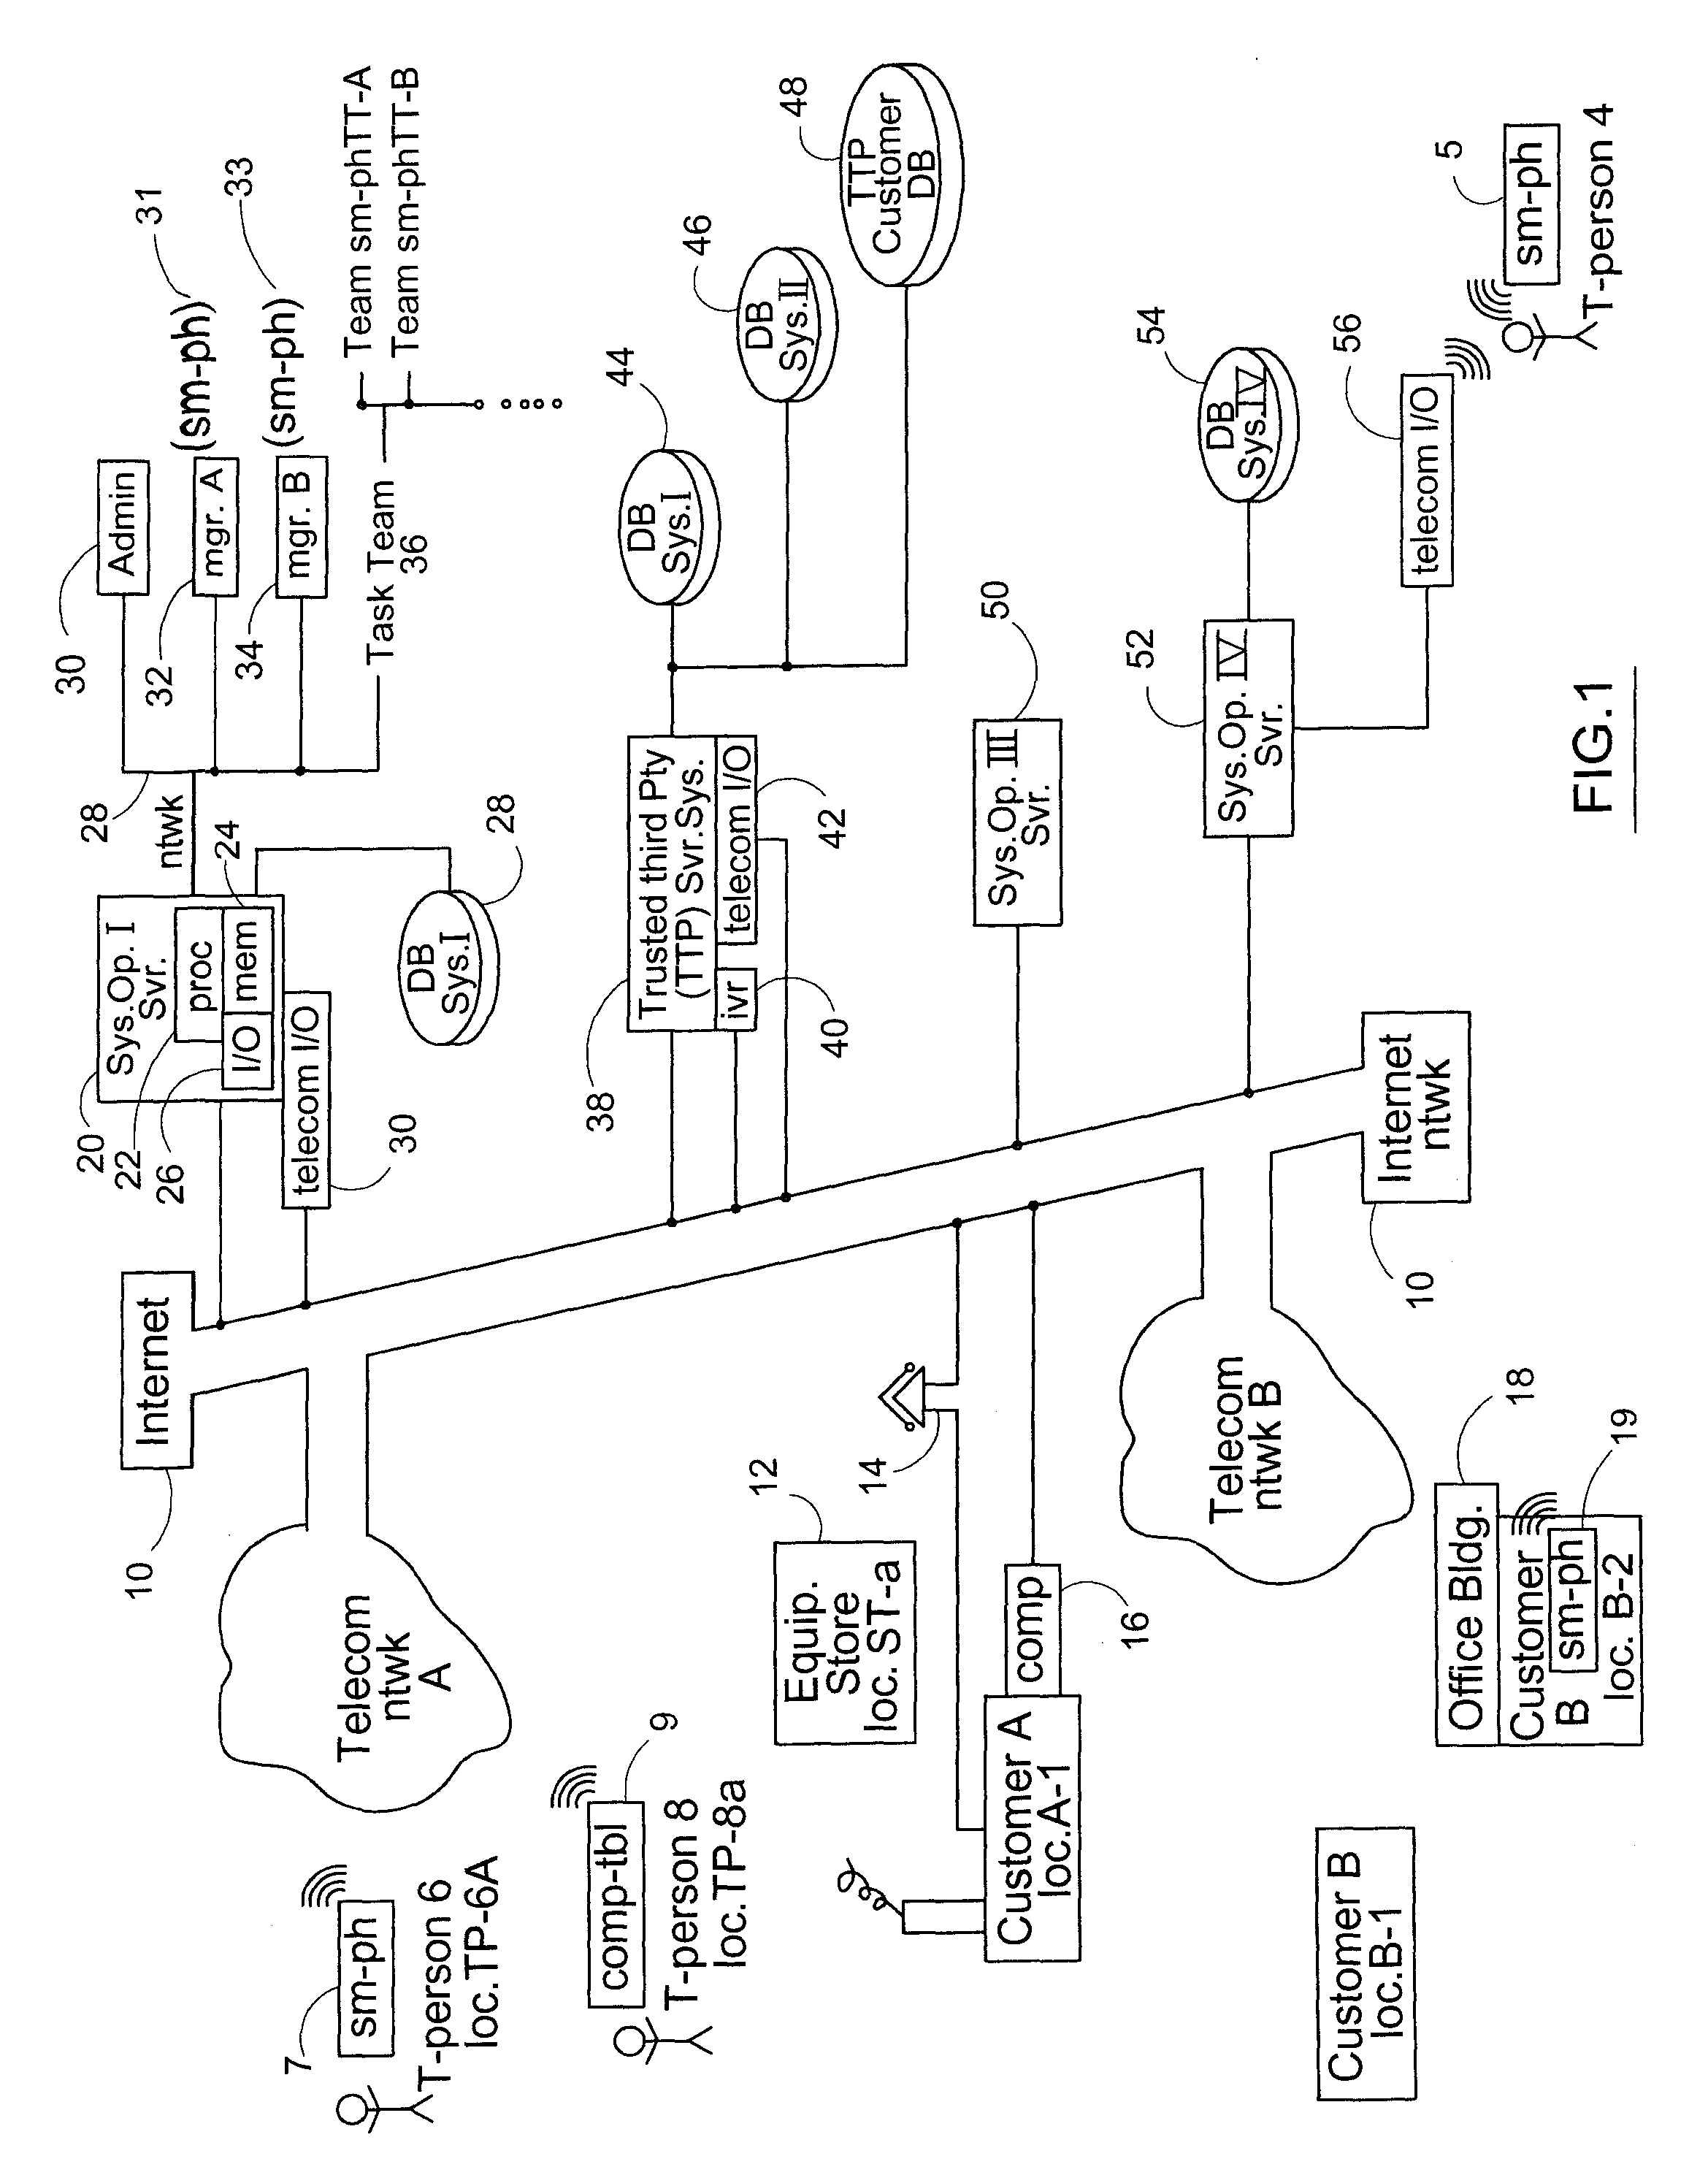 Method and System to Analyze Time Stamp Location Data to Produce Movement and Idle Segments